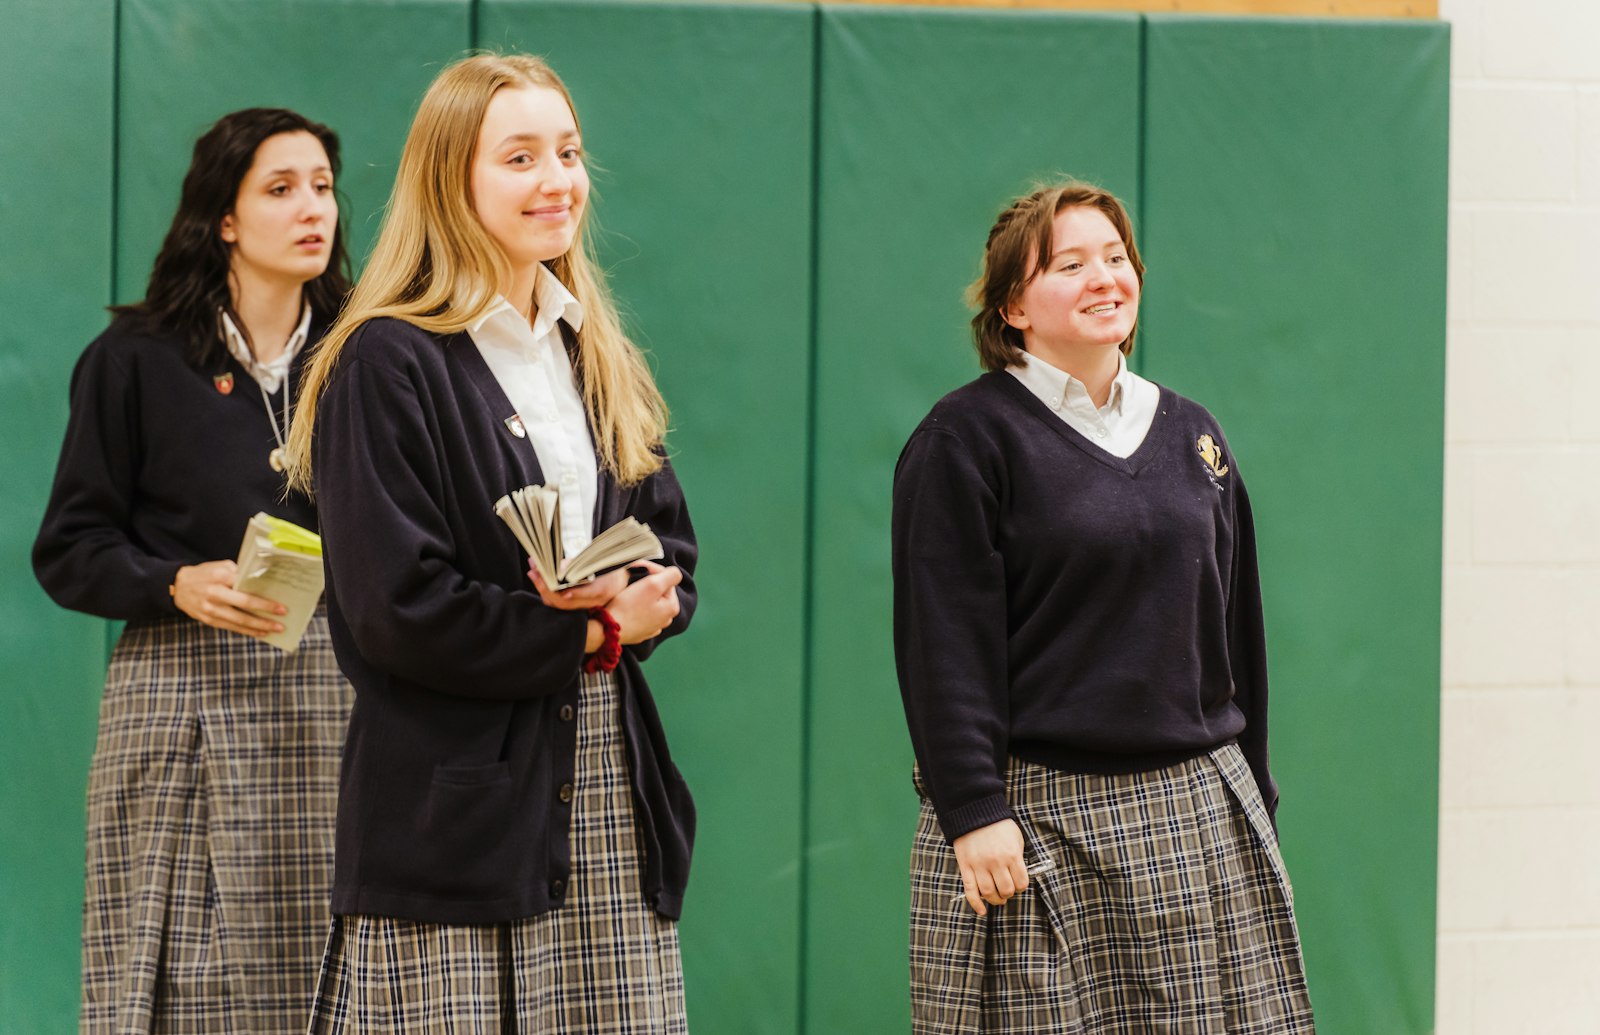 Chesterton Academy of Our Lady of Guadalupe is the first Chesterton Academy in the Archdiocese of Detroit, but by Fall 2022, the network will have four schools in Michigan.